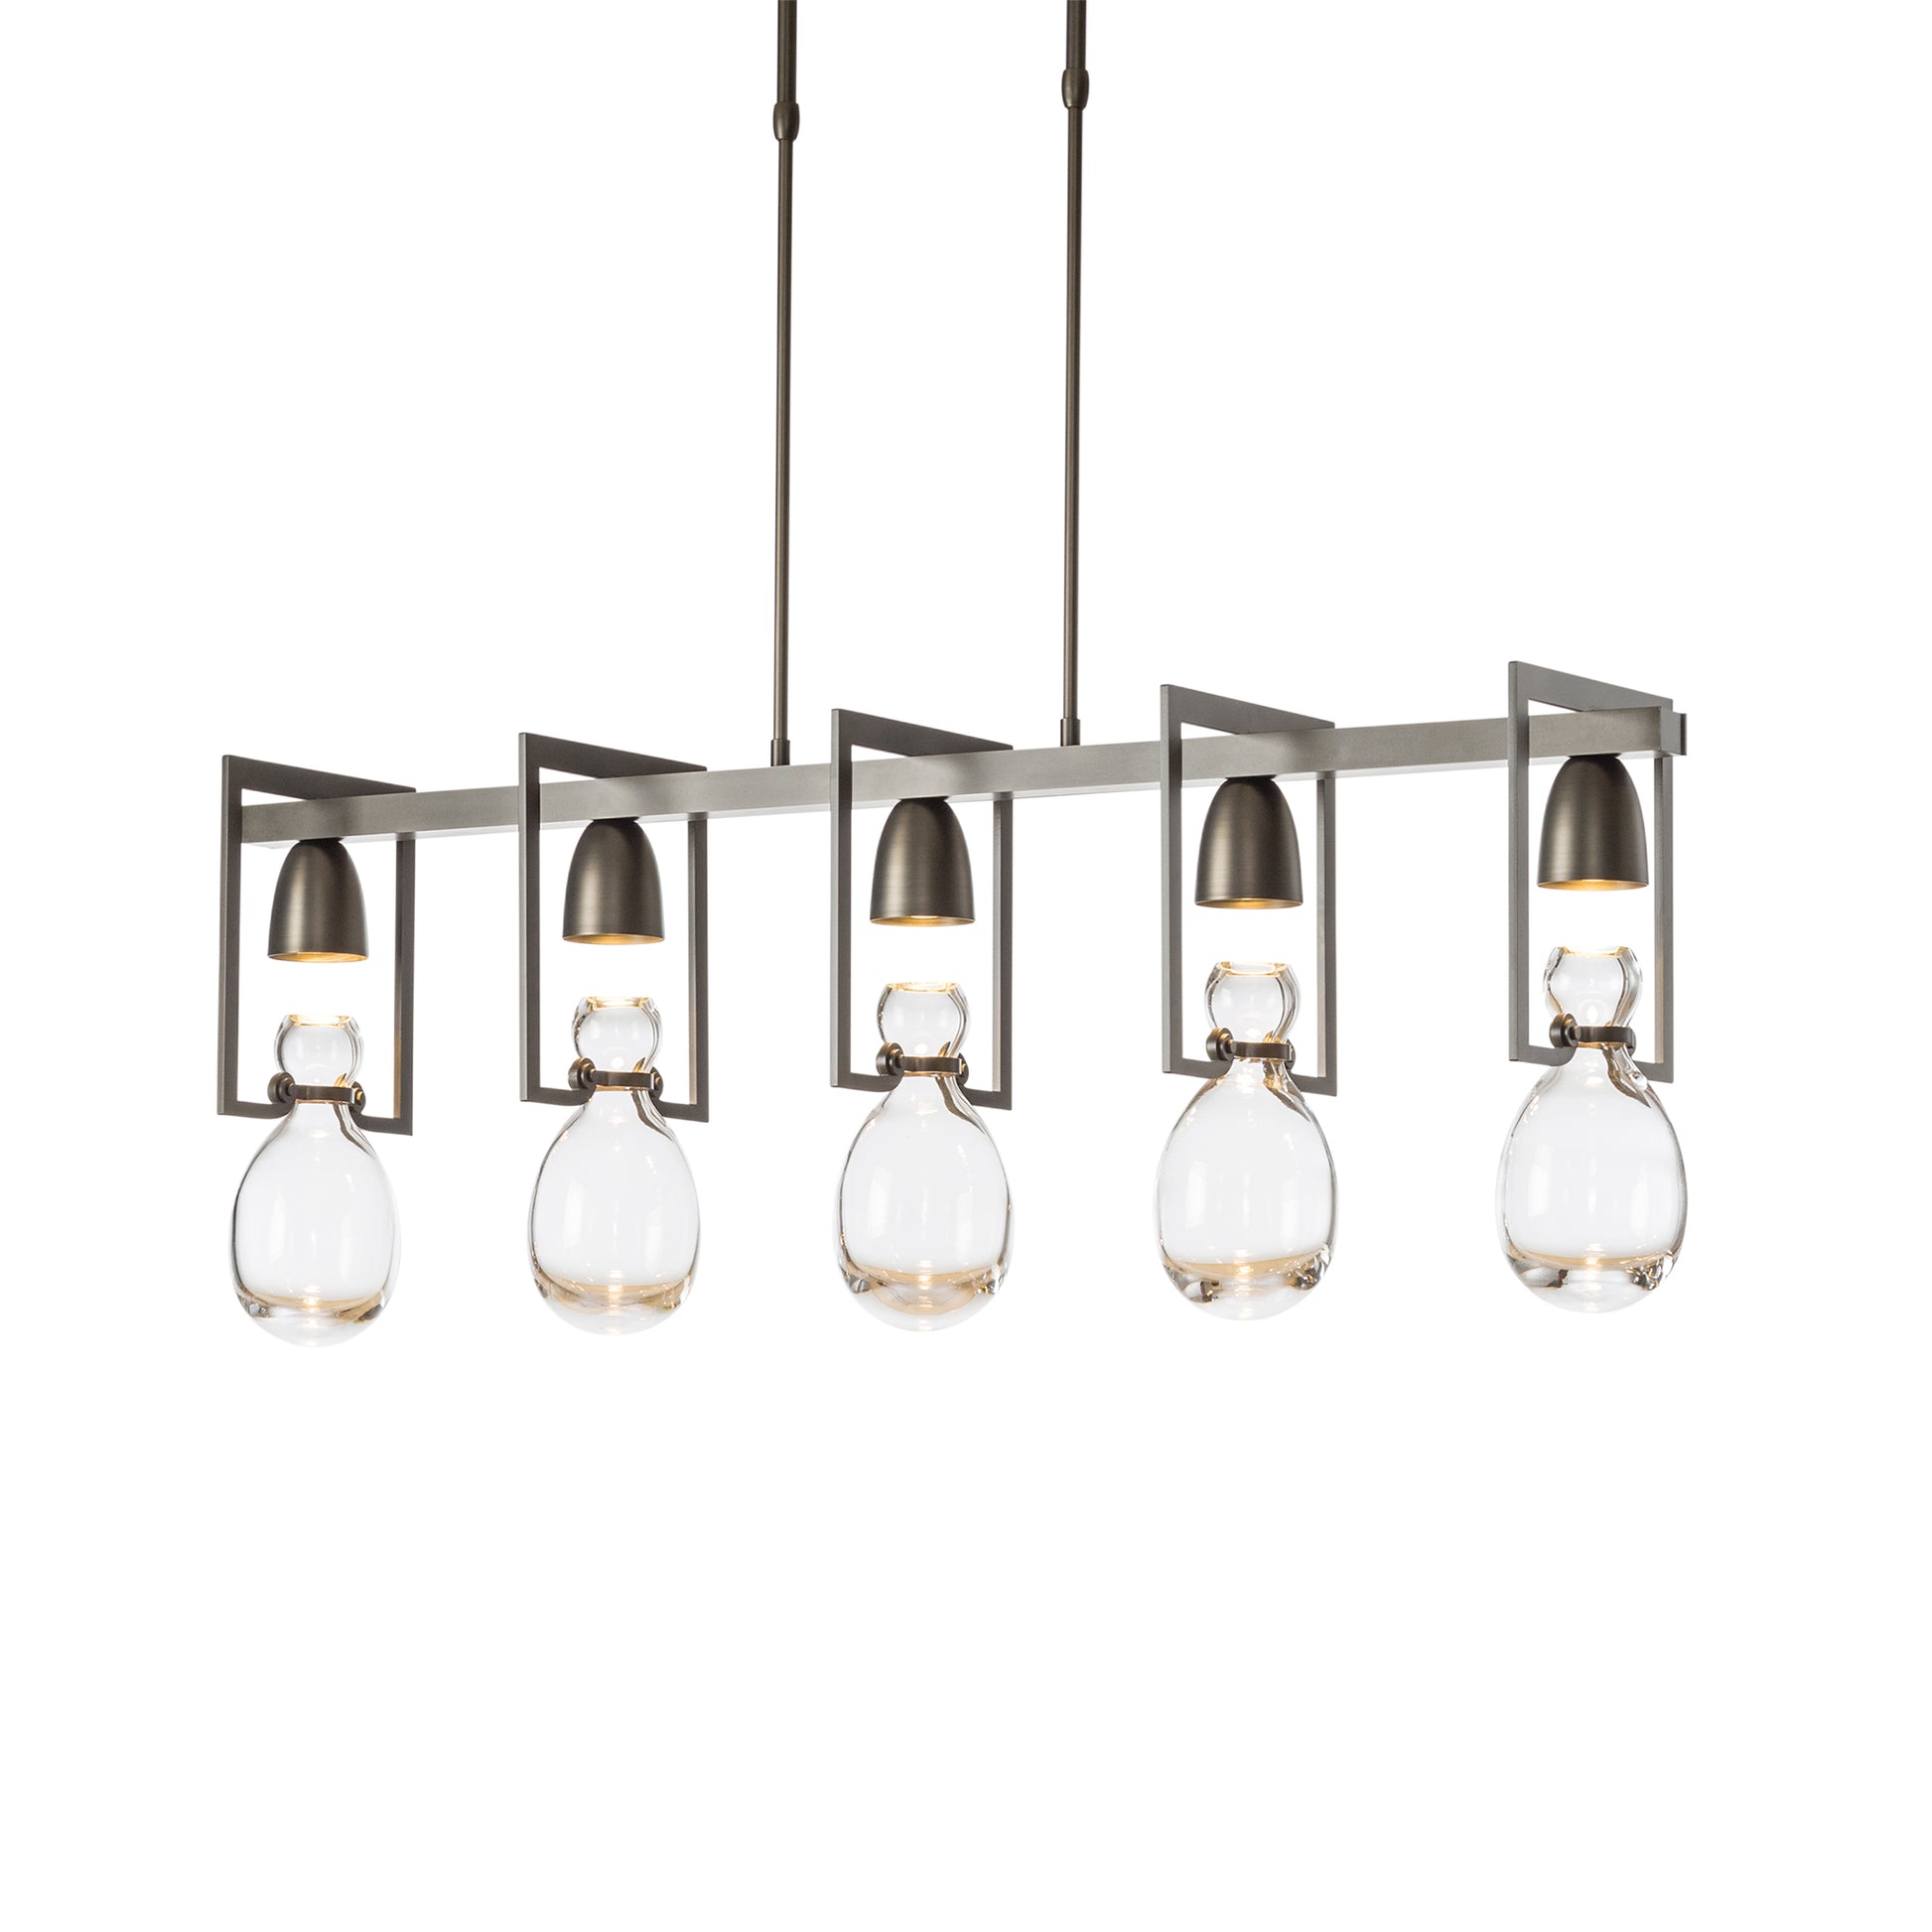 A handcrafted modern Apothecary Pendant with glass balls hanging from it by Hubbardton Forge.